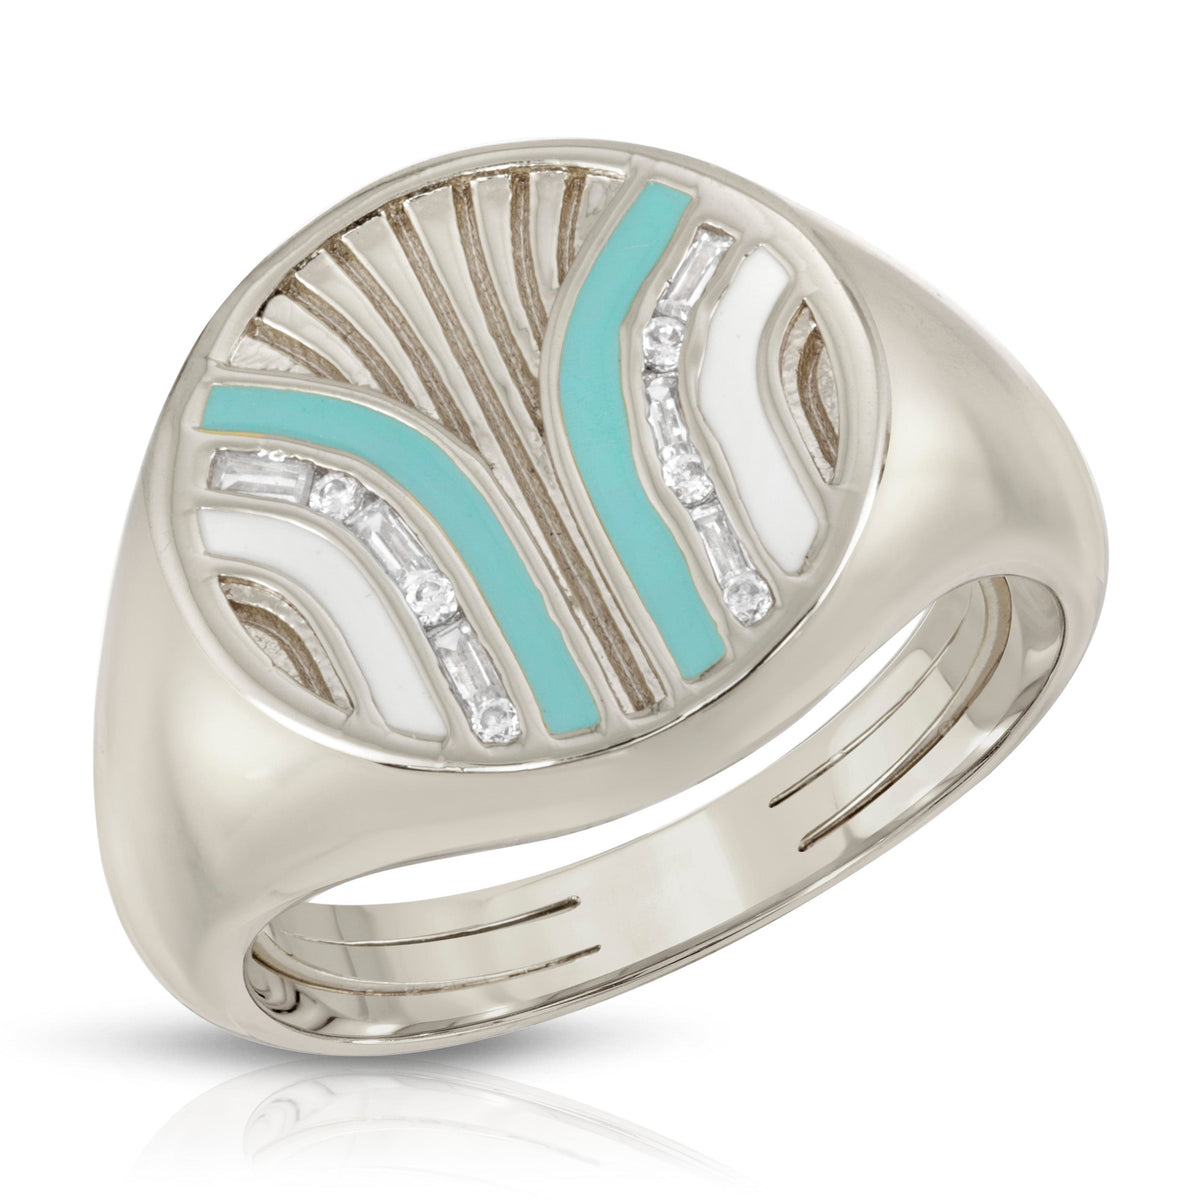 South Beach Signet Ring- Silver in Turquoise/White